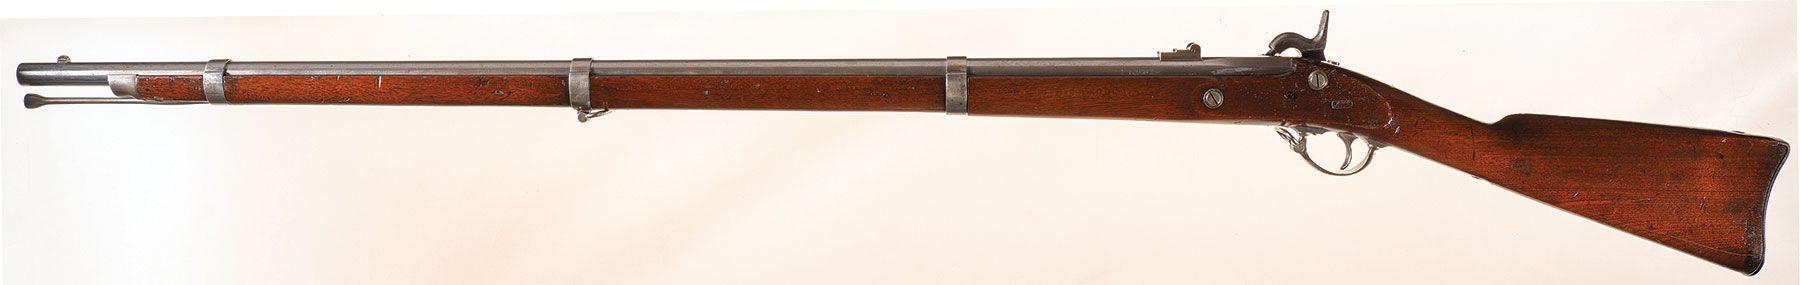 Bridesburg Model 1861 Percussion Rifle-Musket with Bayonet